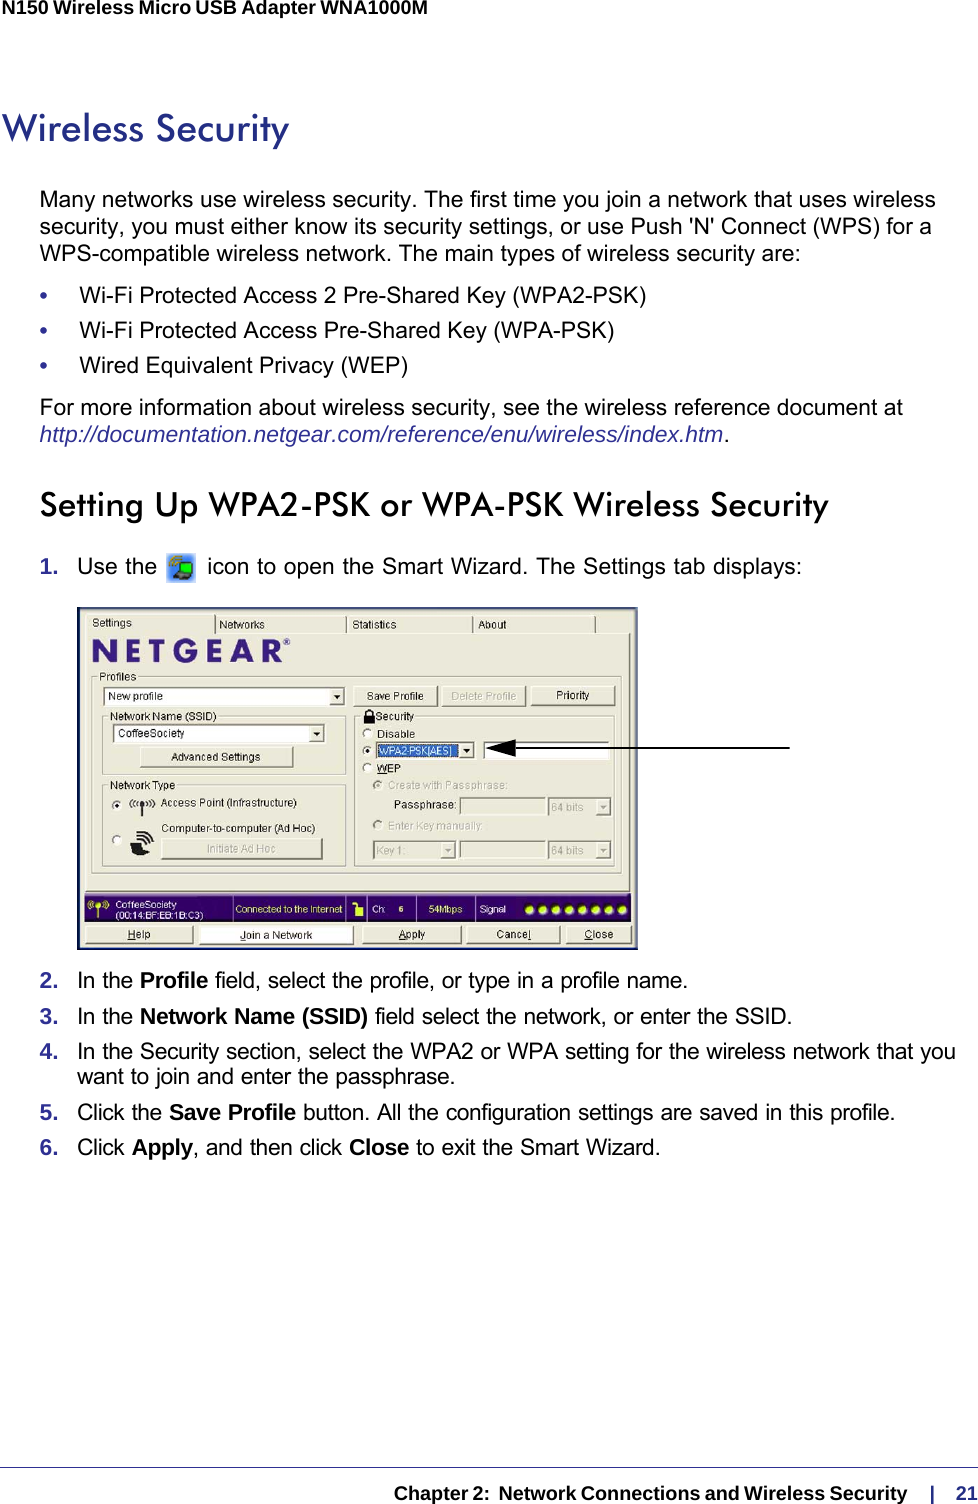   Chapter 2:  Network Connections and Wireless Security     |    21N150 Wireless Micro USB Adapter WNA1000M Wireless SecurityMany networks use wireless security. The first time you join a network that uses wireless security, you must either know its security settings, or use Push &apos;N&apos; Connect (WPS) for a WPS-compatible wireless network. The main types of wireless security are:•     Wi-Fi Protected Access 2 Pre-Shared Key (WPA2-PSK)•     Wi-Fi Protected Access Pre-Shared Key (WPA-PSK)•     Wired Equivalent Privacy (WEP)For more information about wireless security, see the wireless reference document at http://documentation.netgear.com/reference/enu/wireless/index.htm.Setting Up WPA2-PSK or WPA-PSK Wireless Security1.  Use the   icon to open the Smart Wizard. The Settings tab displays:2.  In the Profile field, select the profile, or type in a profile name.3.  In the Network Name (SSID) field select the network, or enter the SSID.4.  In the Security section, select the WPA2 or WPA setting for the wireless network that you want to join and enter the passphrase.5.  Click the Save Profile button. All the configuration settings are saved in this profile. 6.  Click Apply, and then click Close to exit the Smart Wizard.